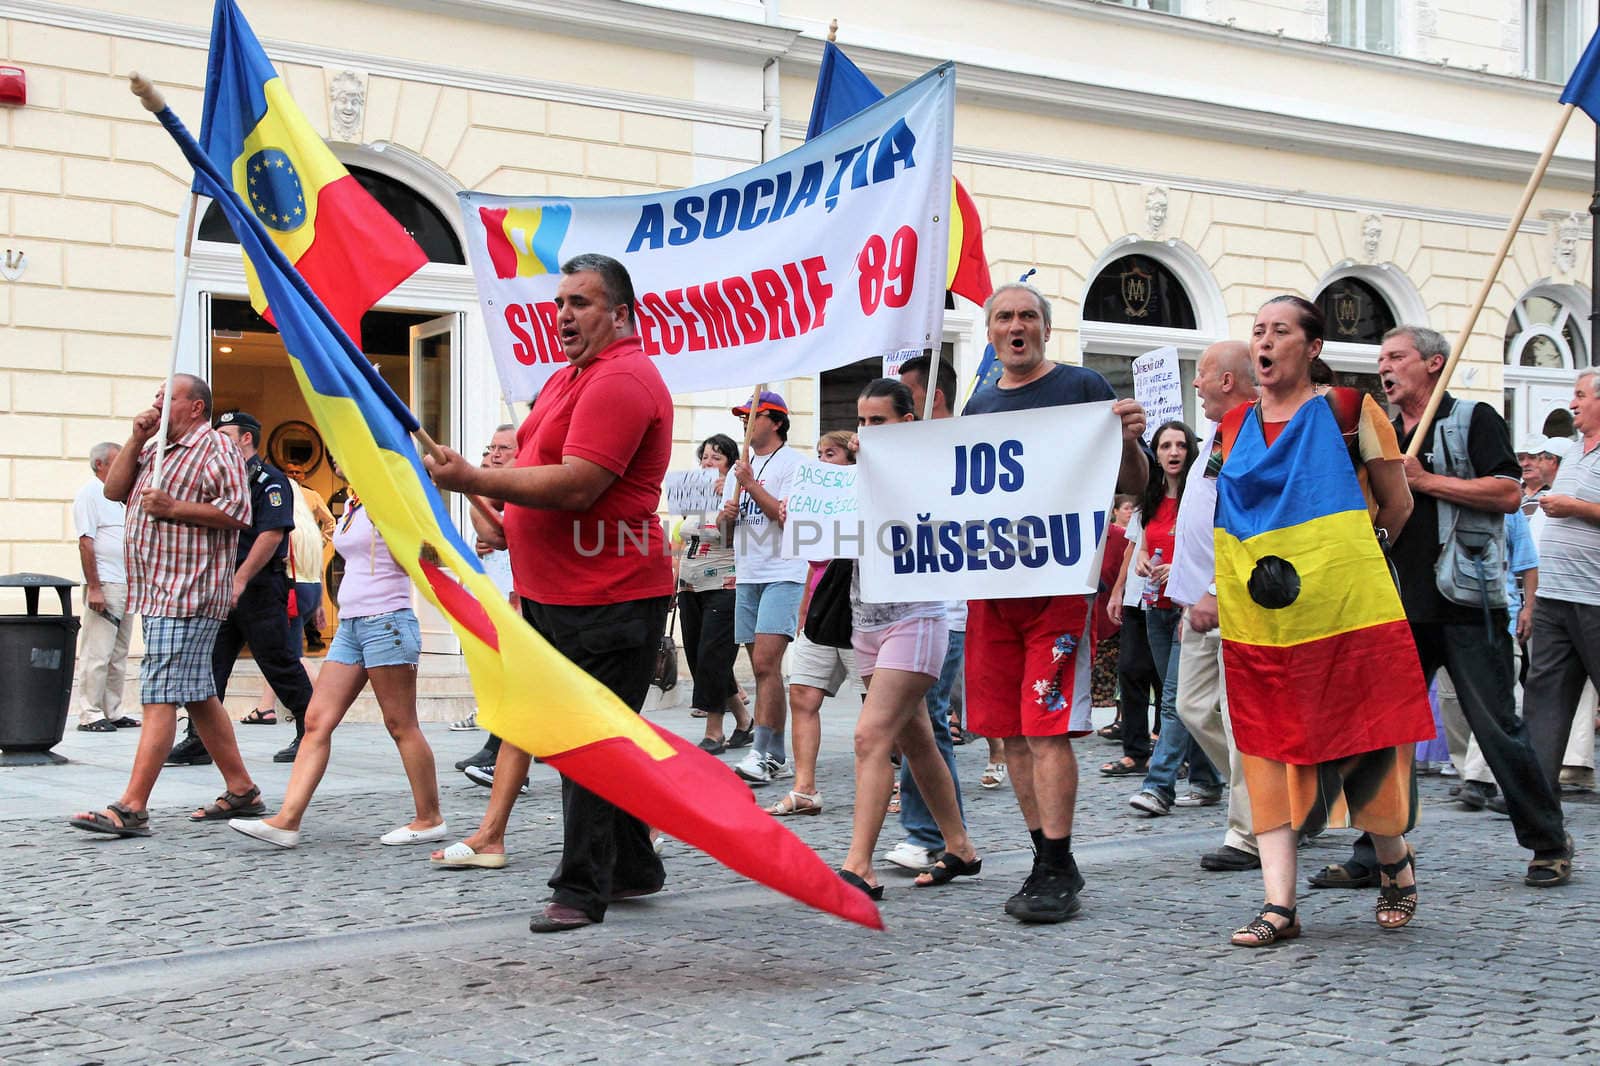 SIBIU, ROMANIA - AUGUST 23: Protesters march on August 23, 2012 in Sibiu, Romania. The protesters are against current president Traian Basescu, they compare him to corrupt communist leader Caucescu.